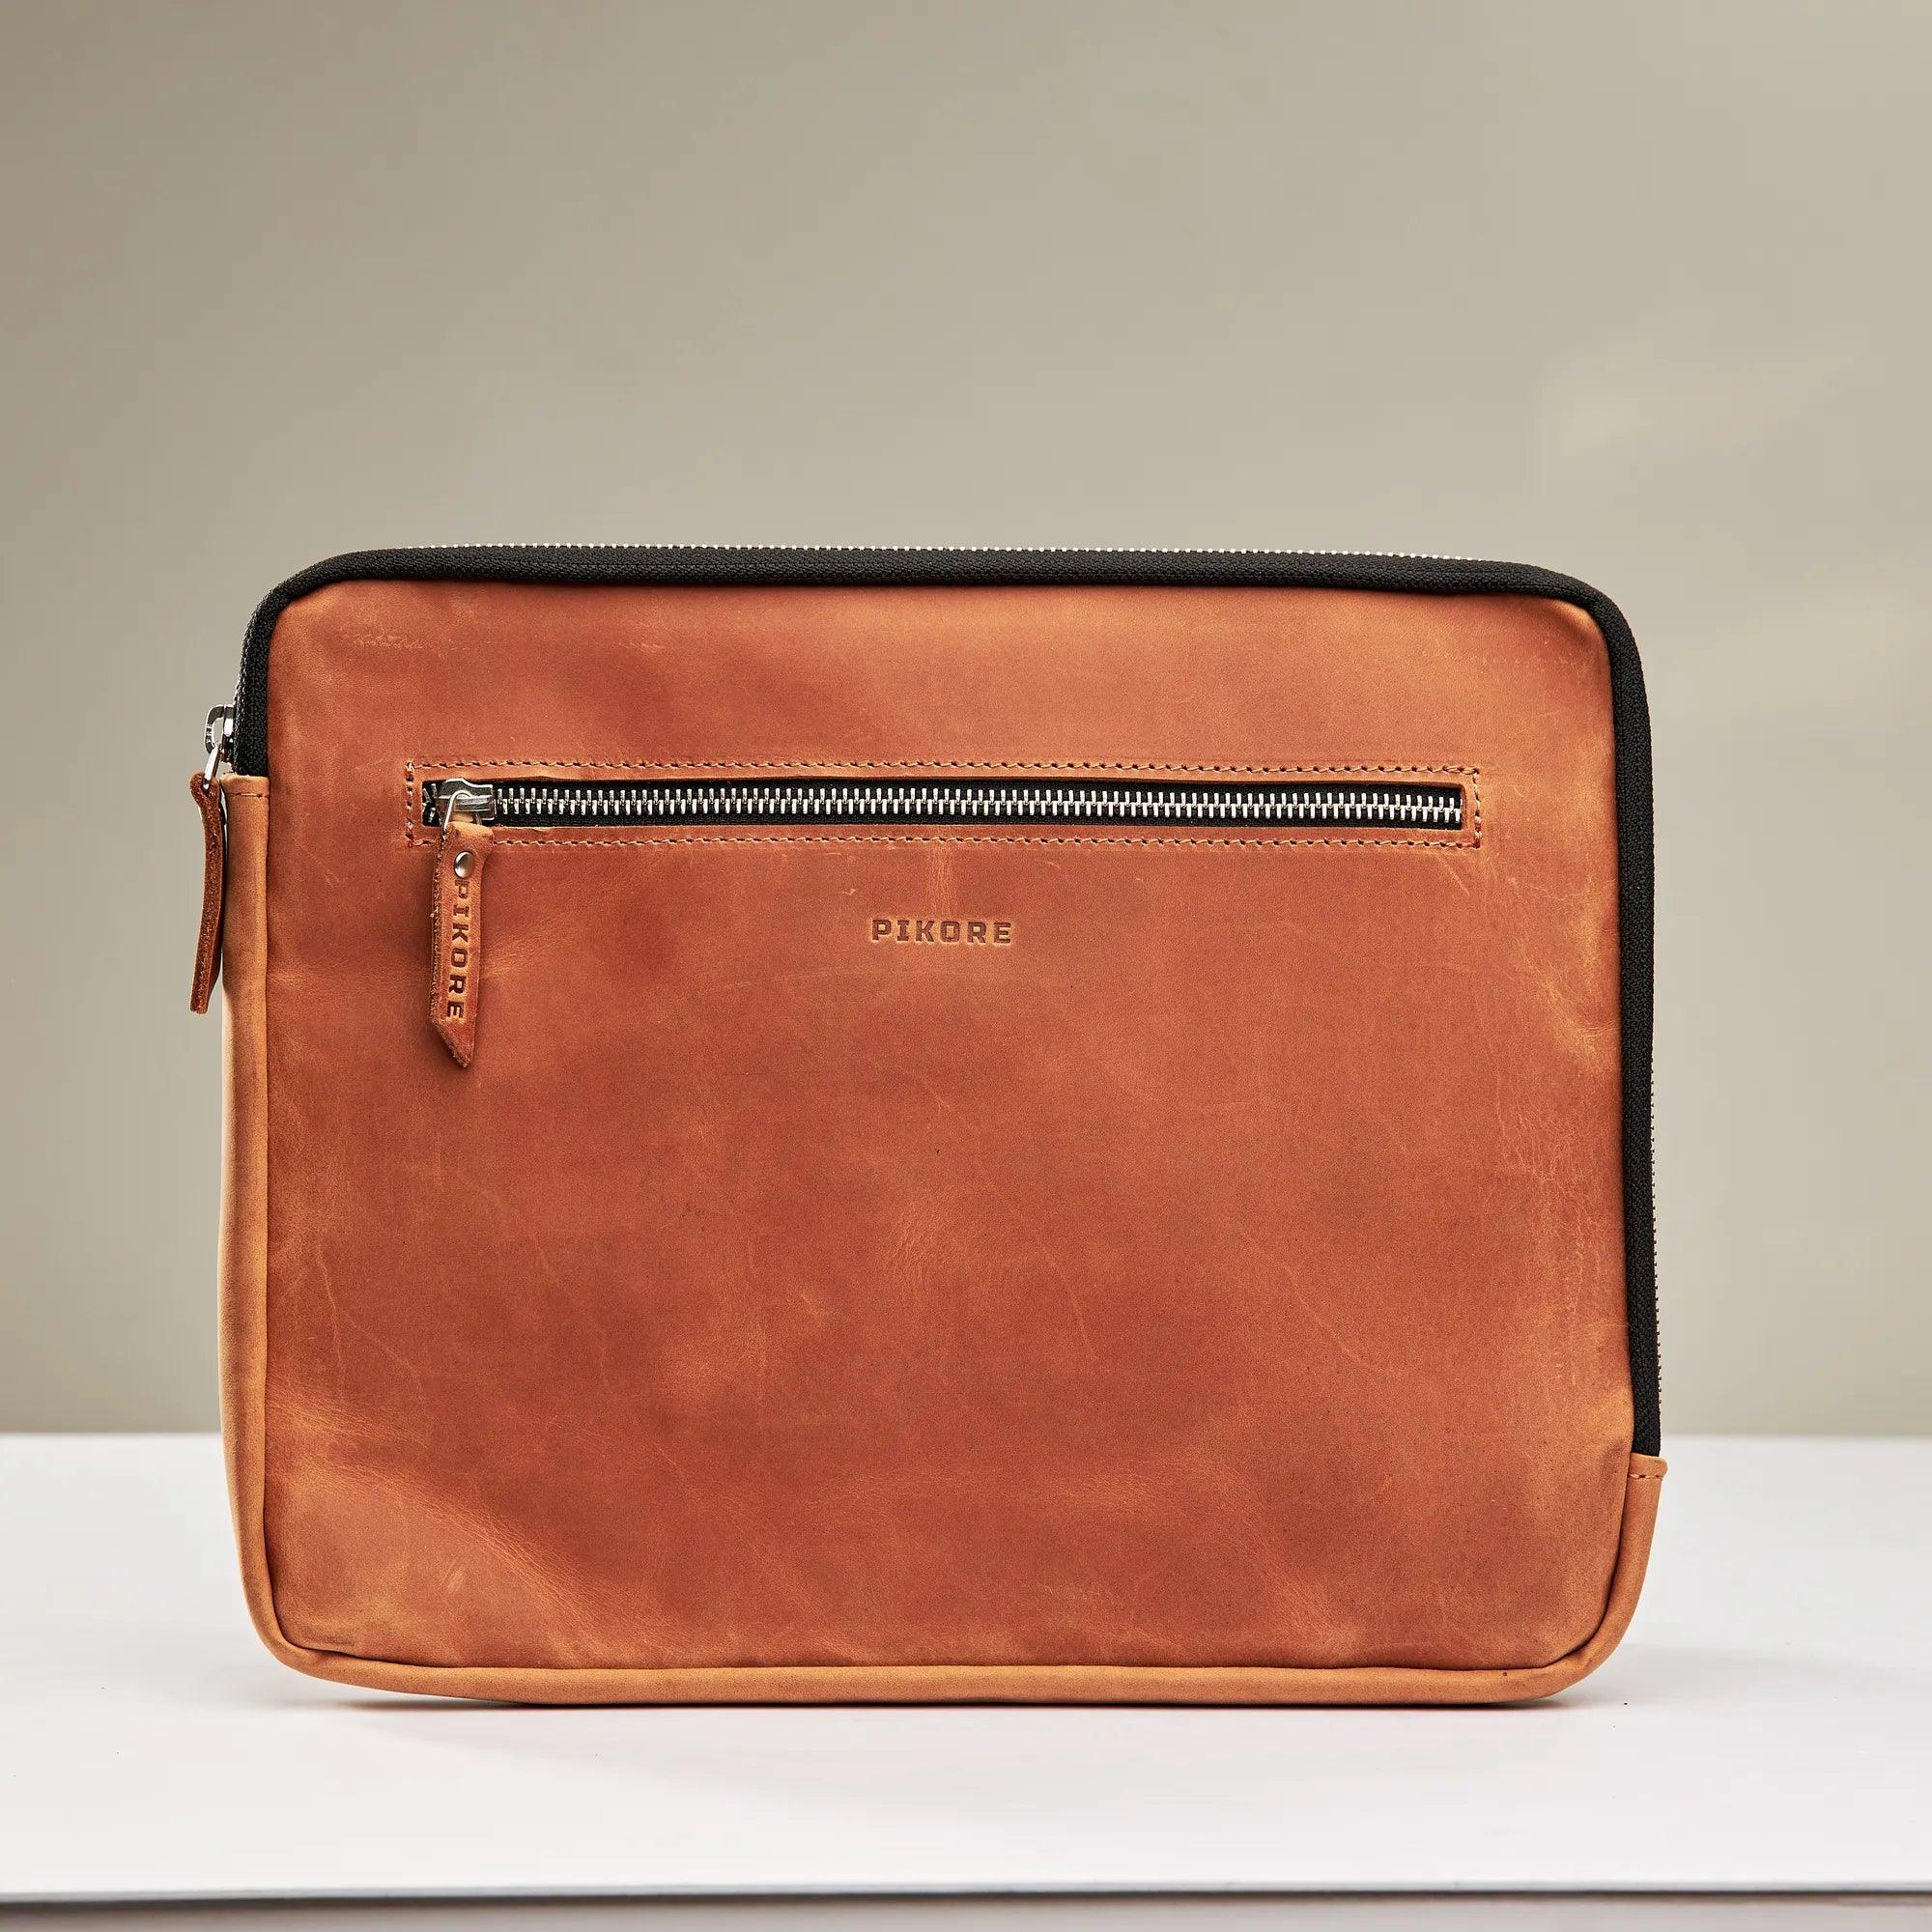 Leather Macbook Sleeve with Zipper - Pikore